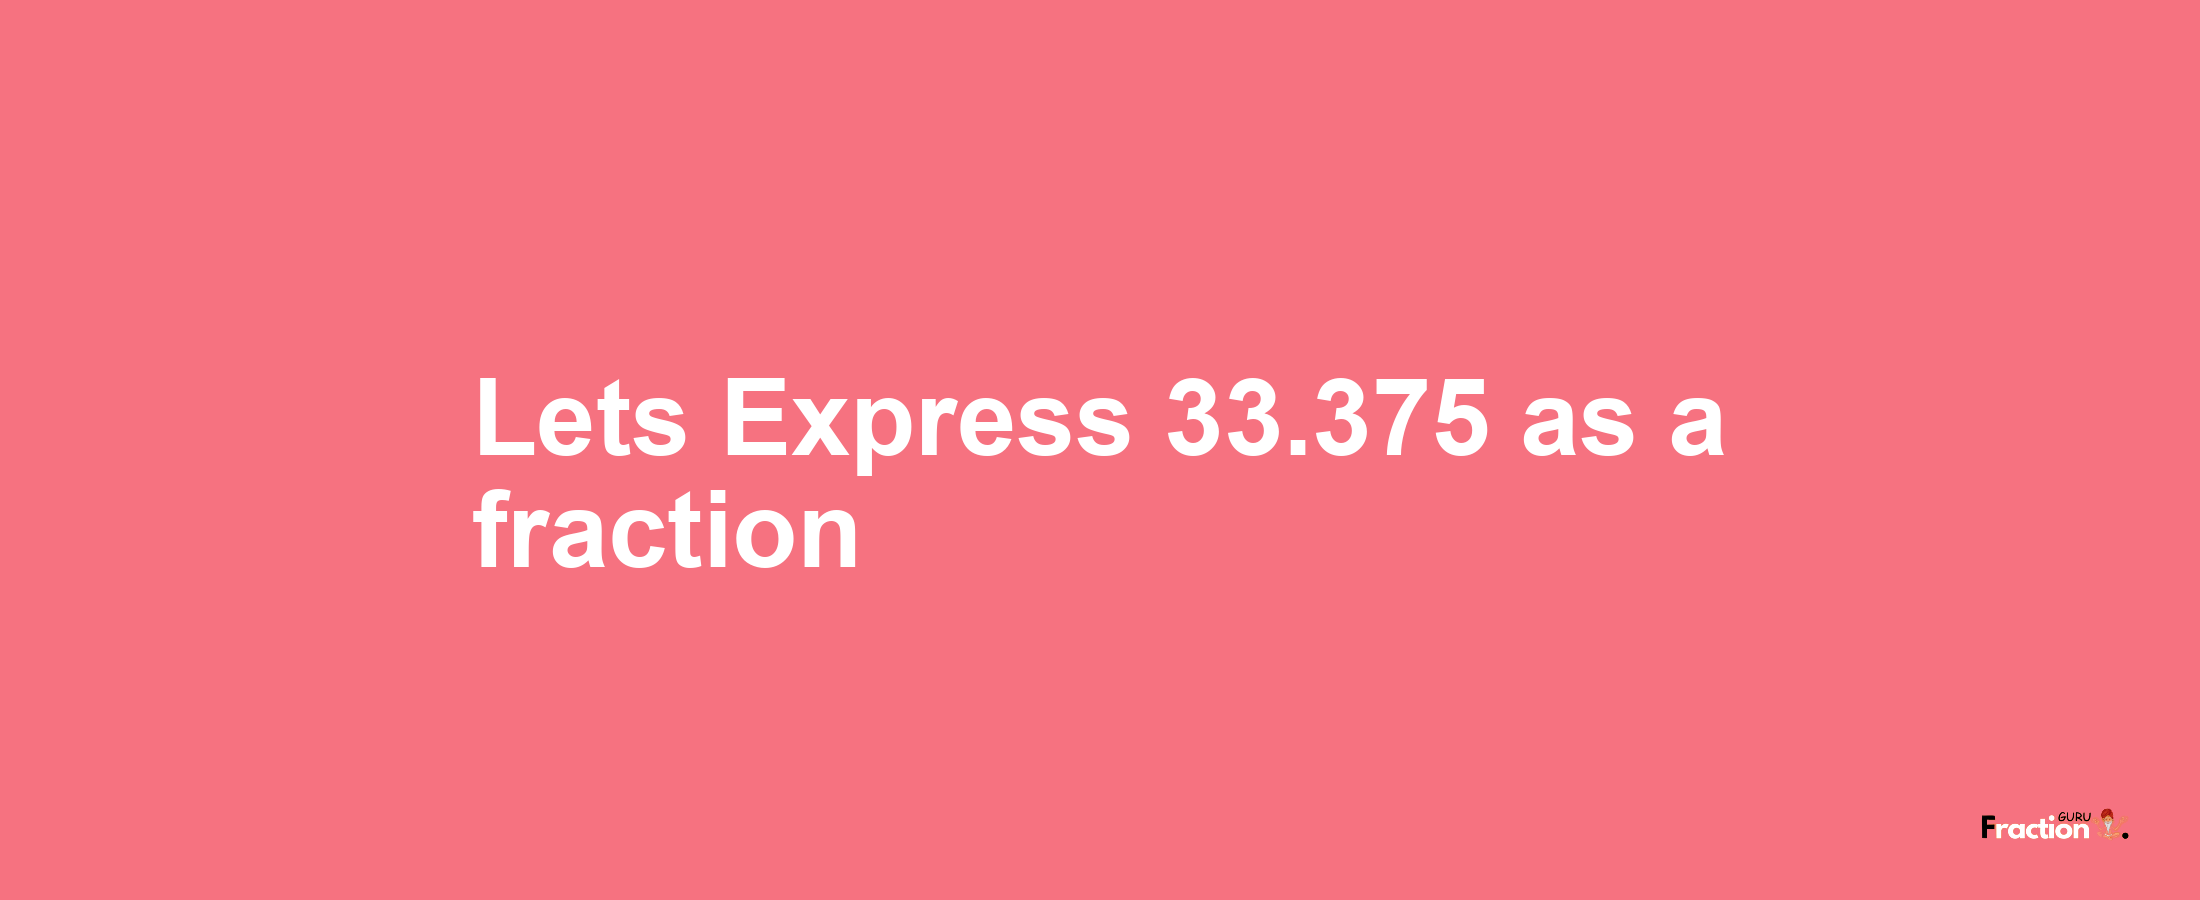 Lets Express 33.375 as afraction